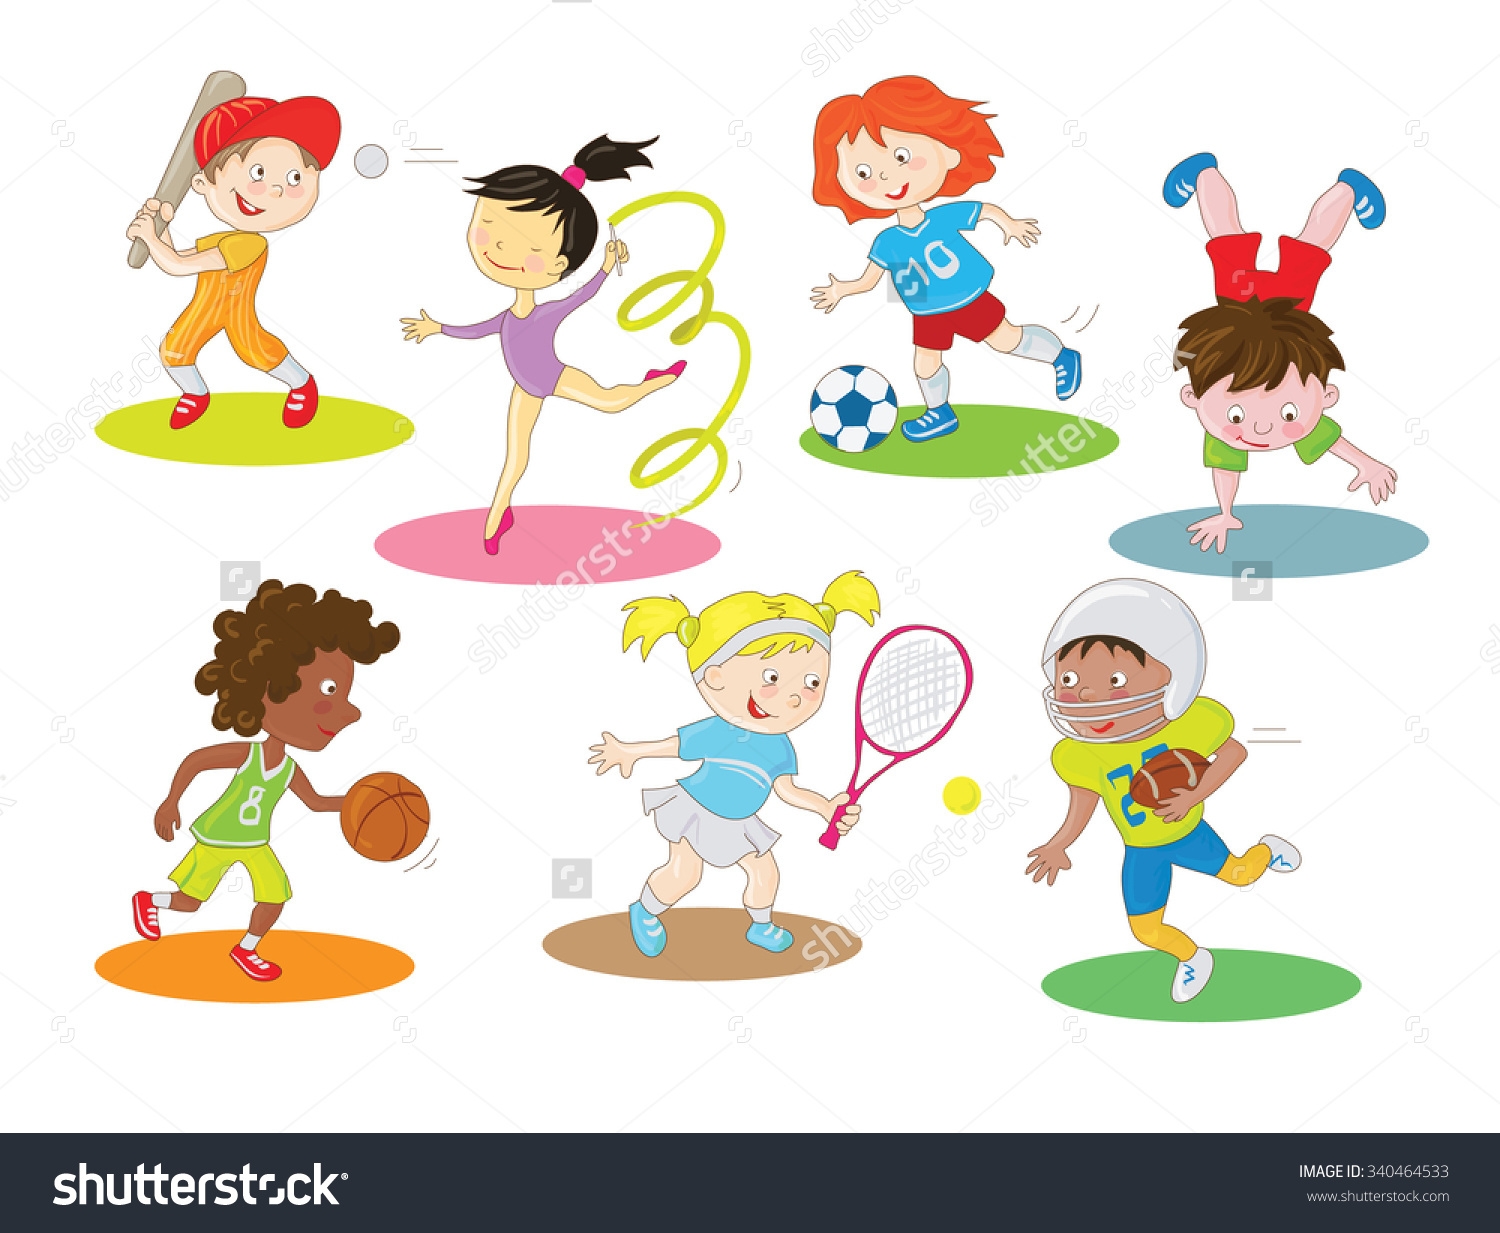 clipart sports day - photo #6